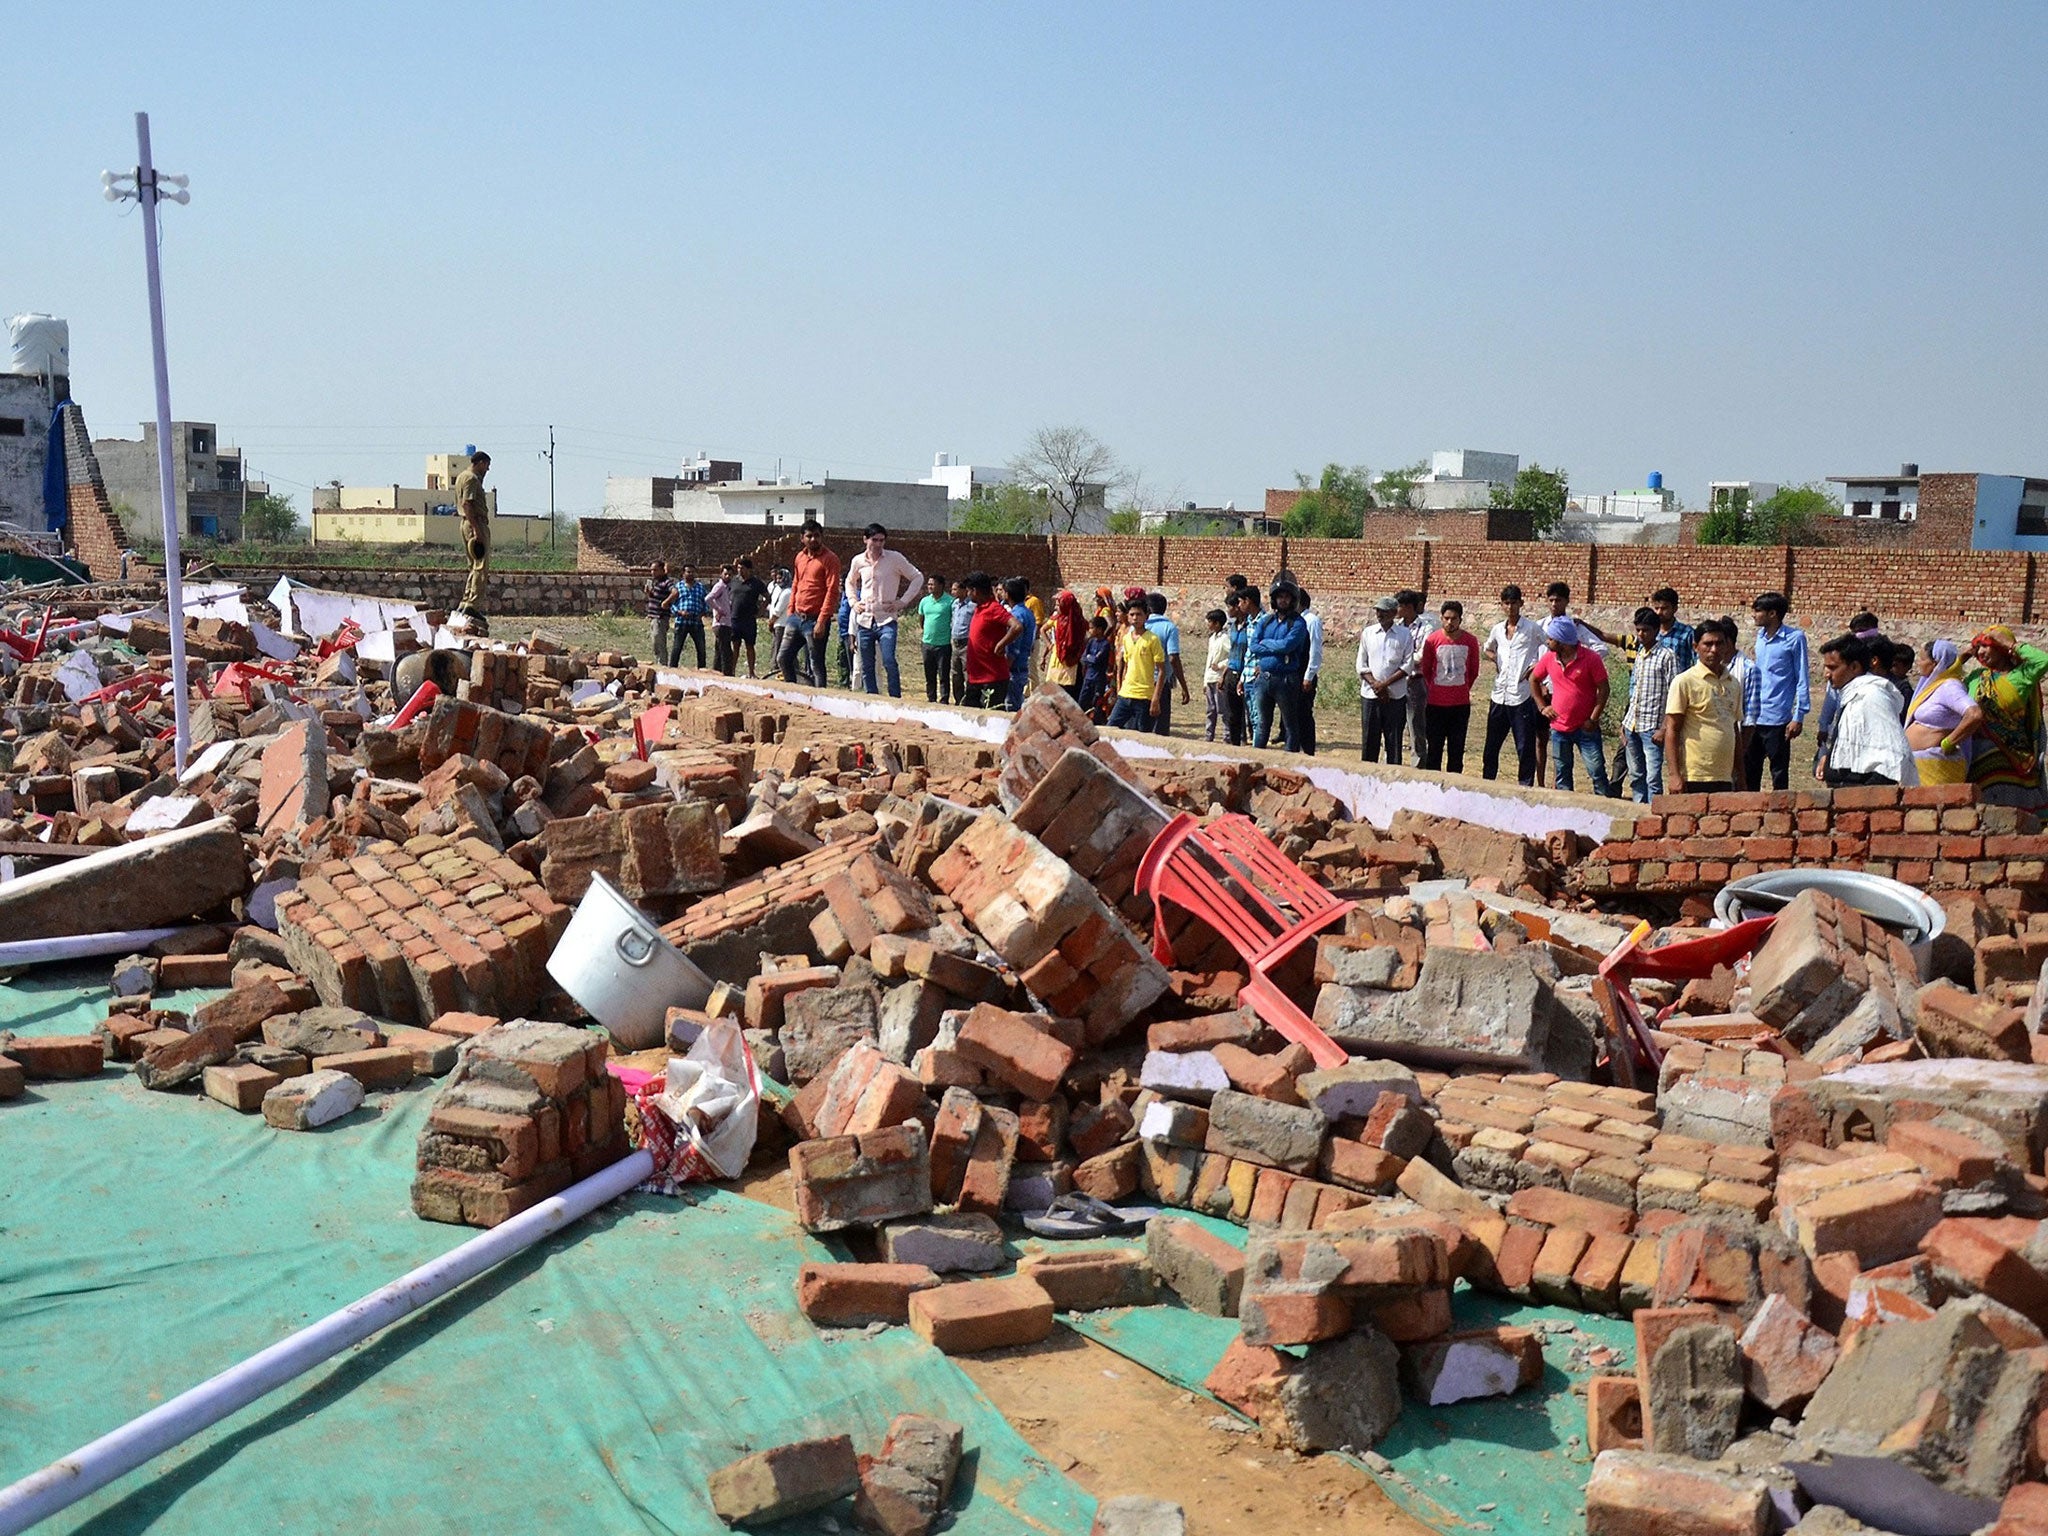 People gather near the debris where at least 24 people were killed when a wall collapsed at a wedding in the Bharatpur district of Rajasthan, India